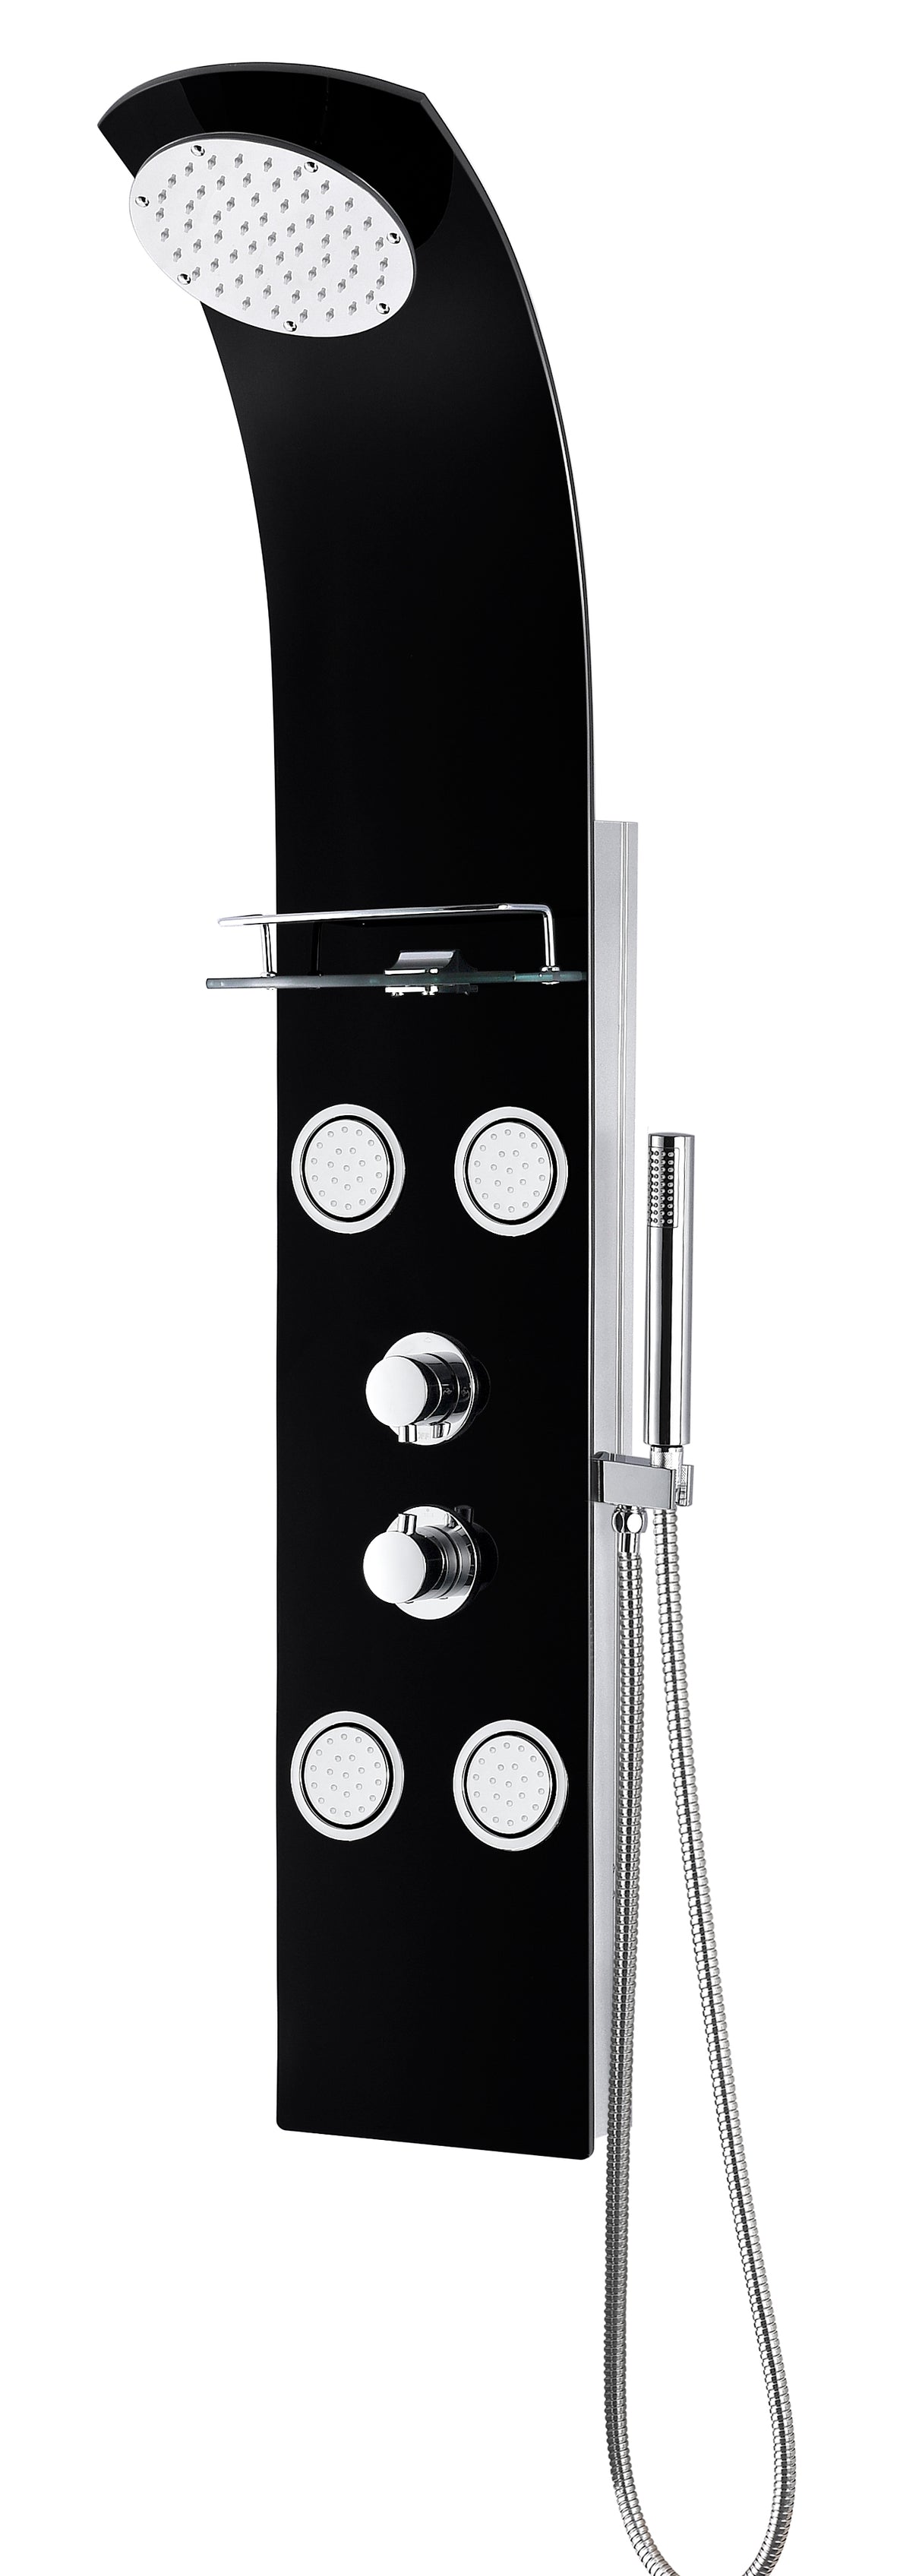 ANZZI SP-AZ8095 Colossal Series 56 in. Full Body Shower Panel System with Heavy Rain Shower and Spray Wand in Black